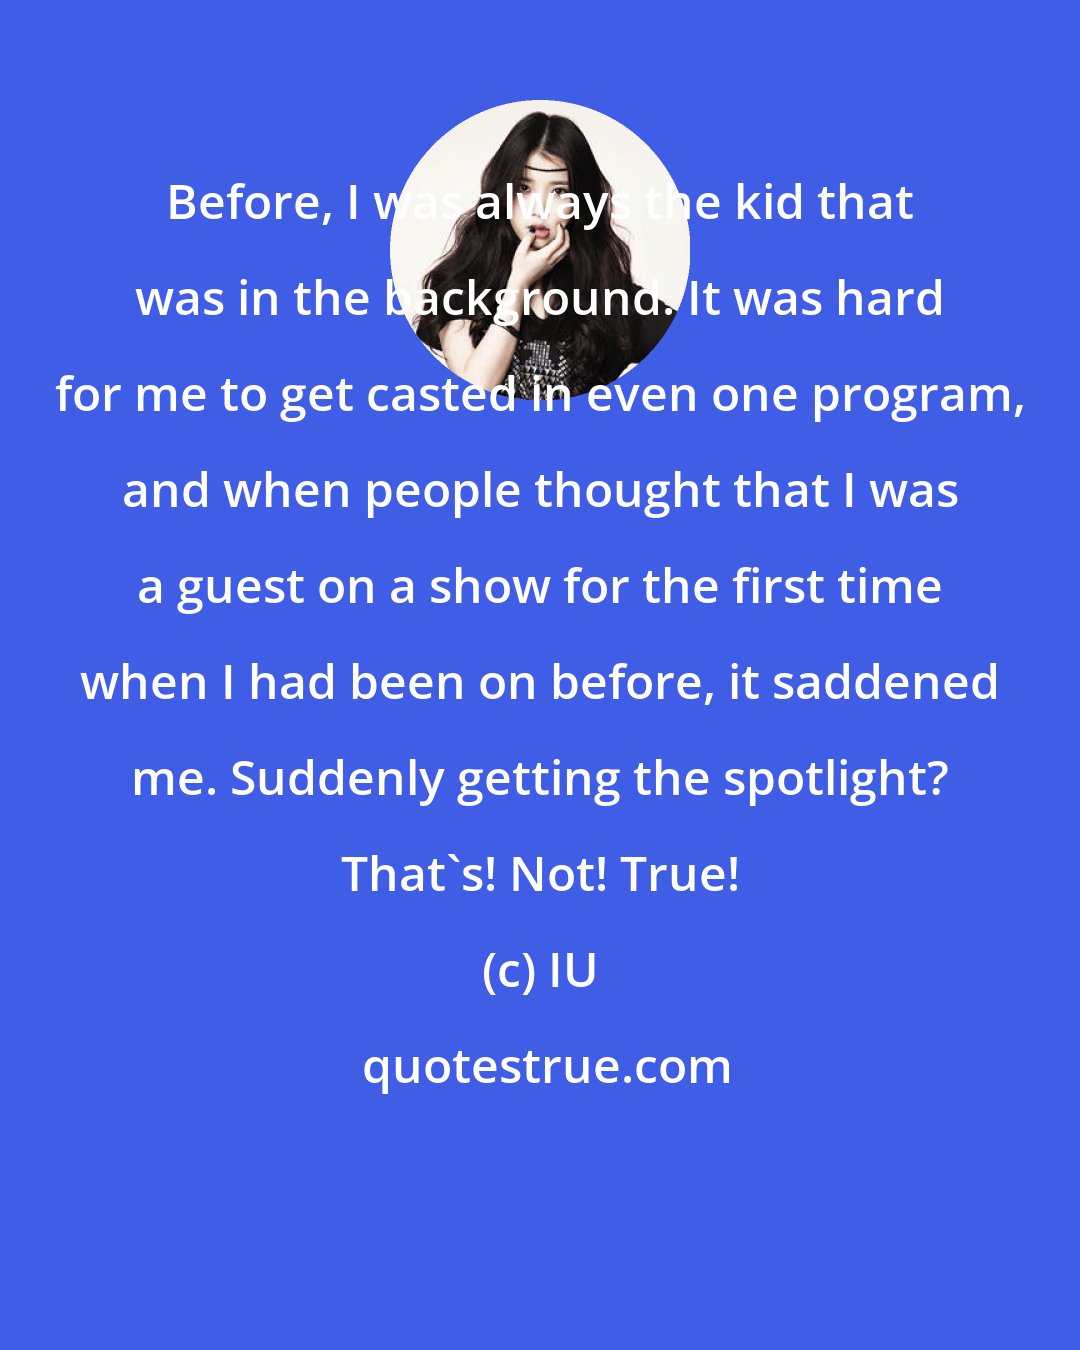 IU: Before, I was always the kid that was in the background. It was hard for me to get casted in even one program, and when people thought that I was a guest on a show for the first time when I had been on before, it saddened me. Suddenly getting the spotlight? That's! Not! True!